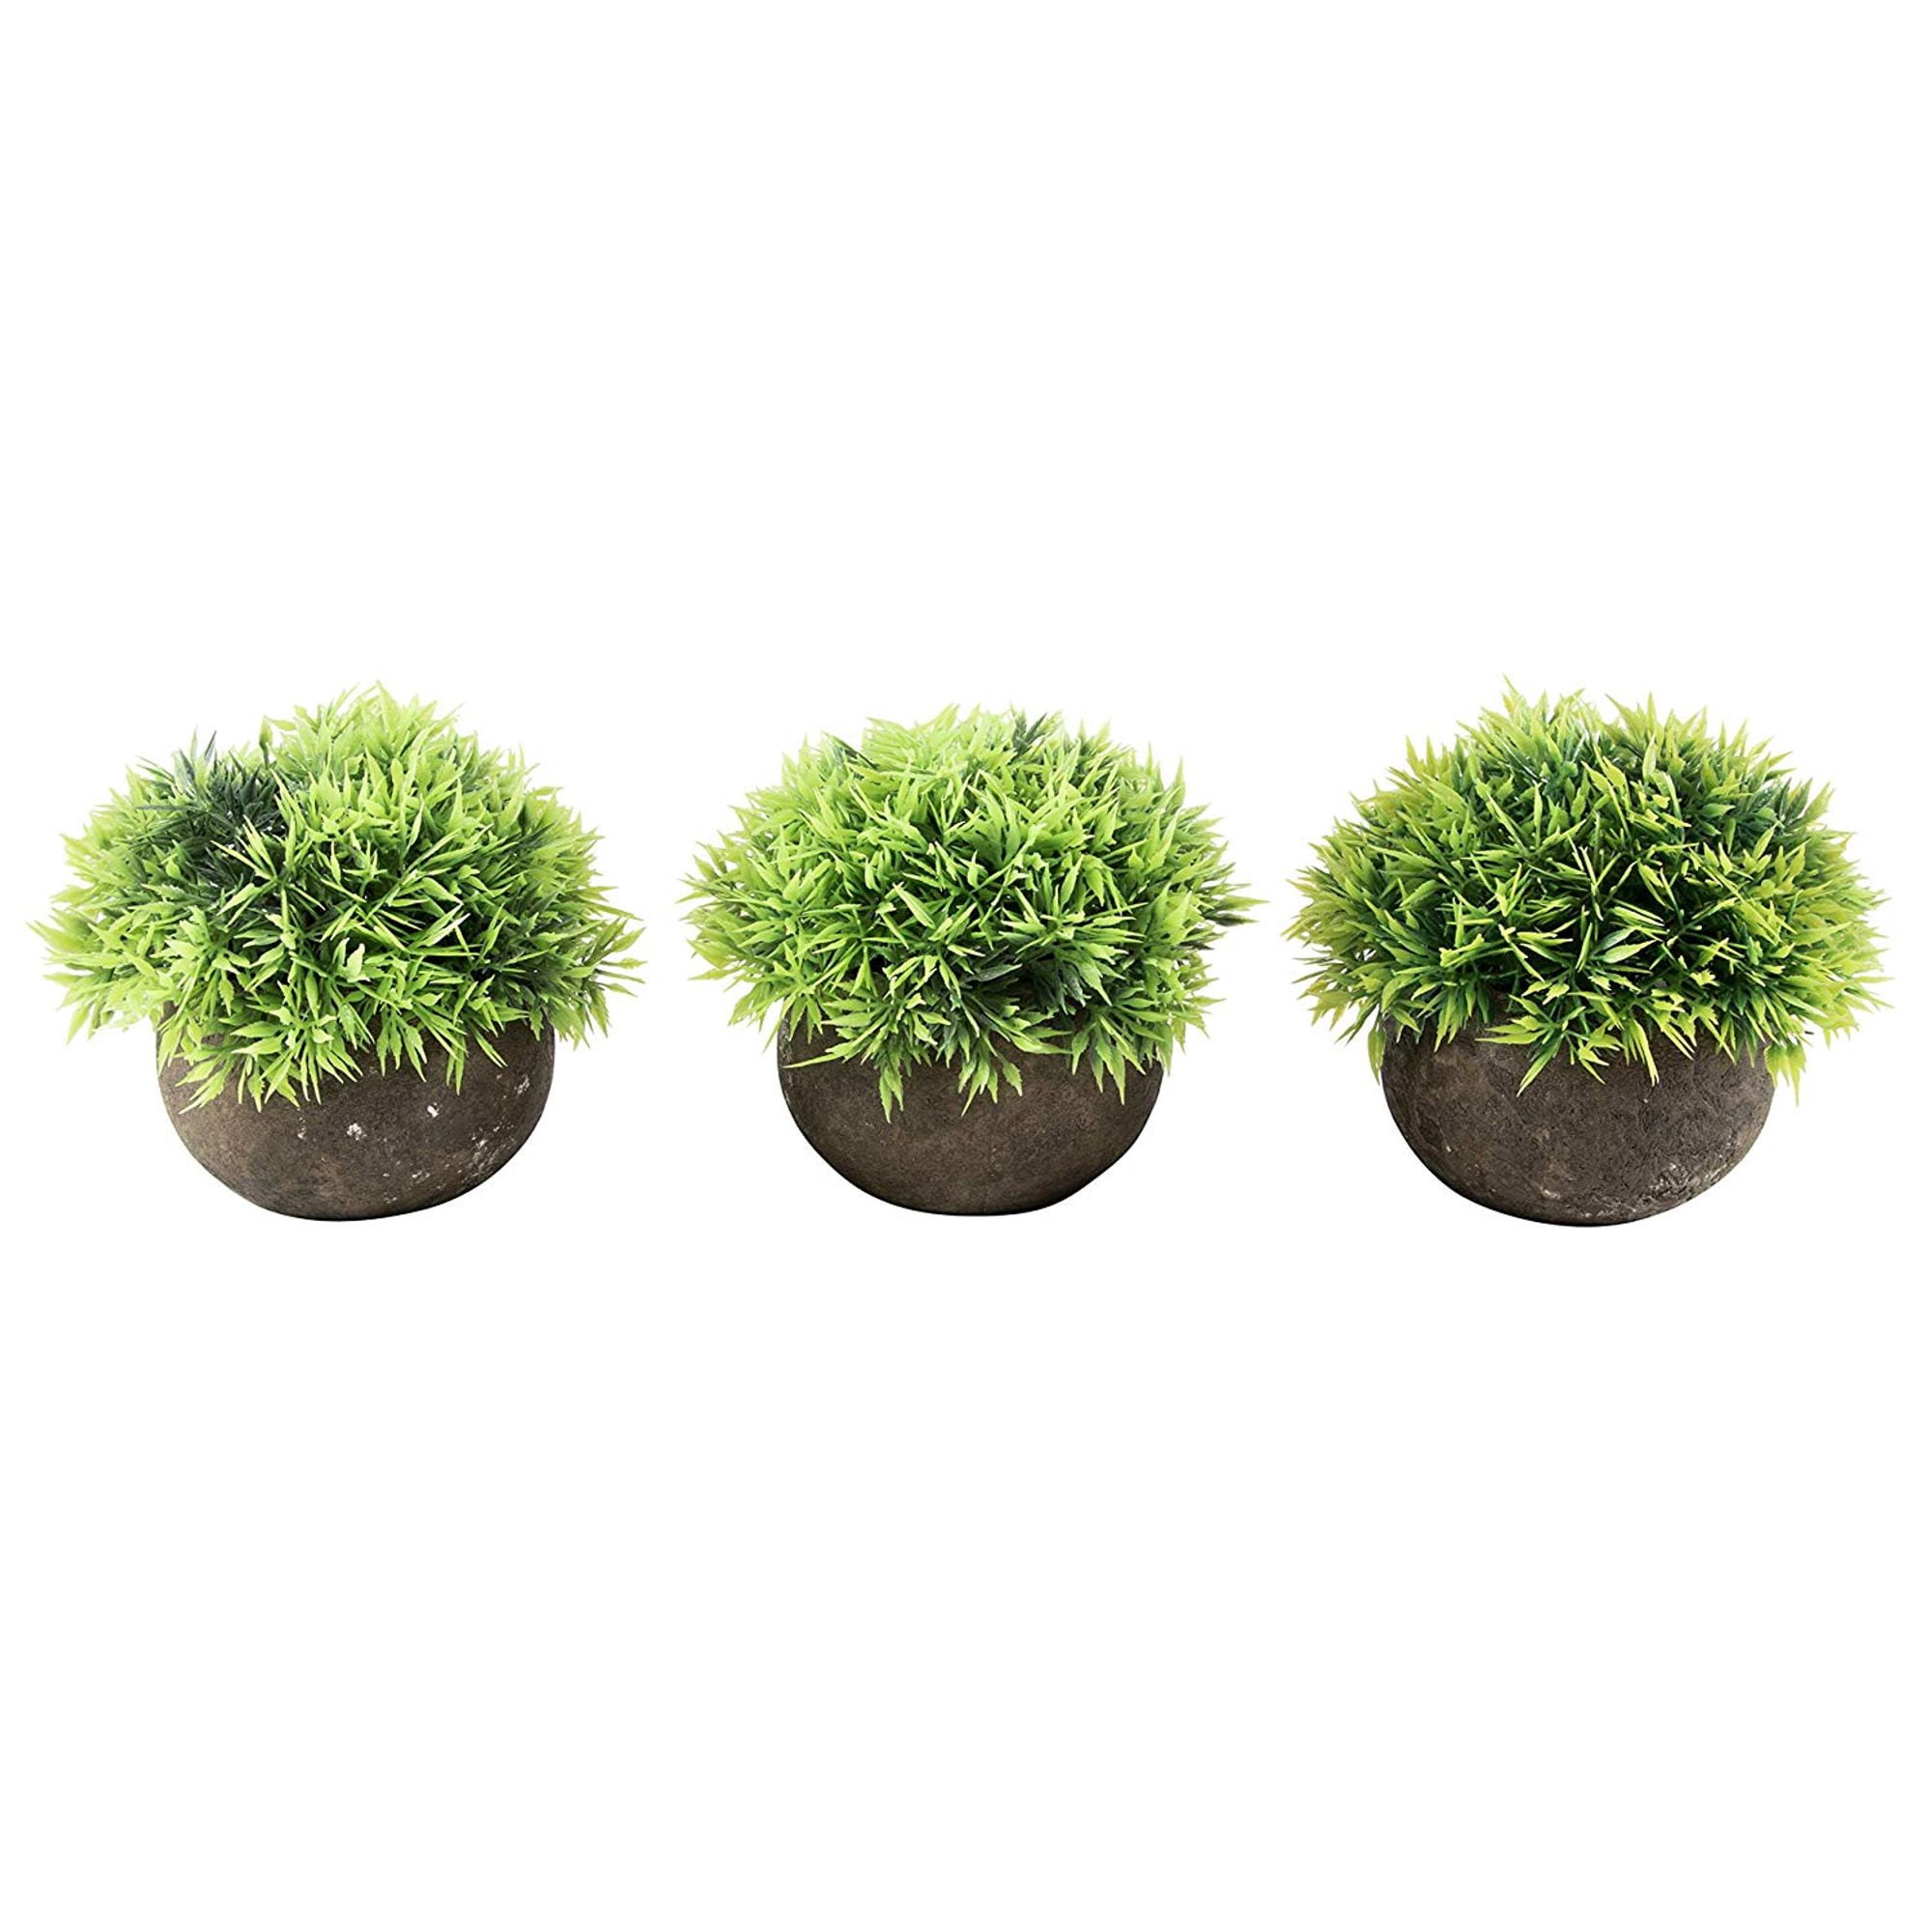 Juvale Mini Artificial Plants 3 Pack Fake Potted Plants For Interior Decoration Small Faux Greenery Decor In Round Pot Decorative Home Bathroom